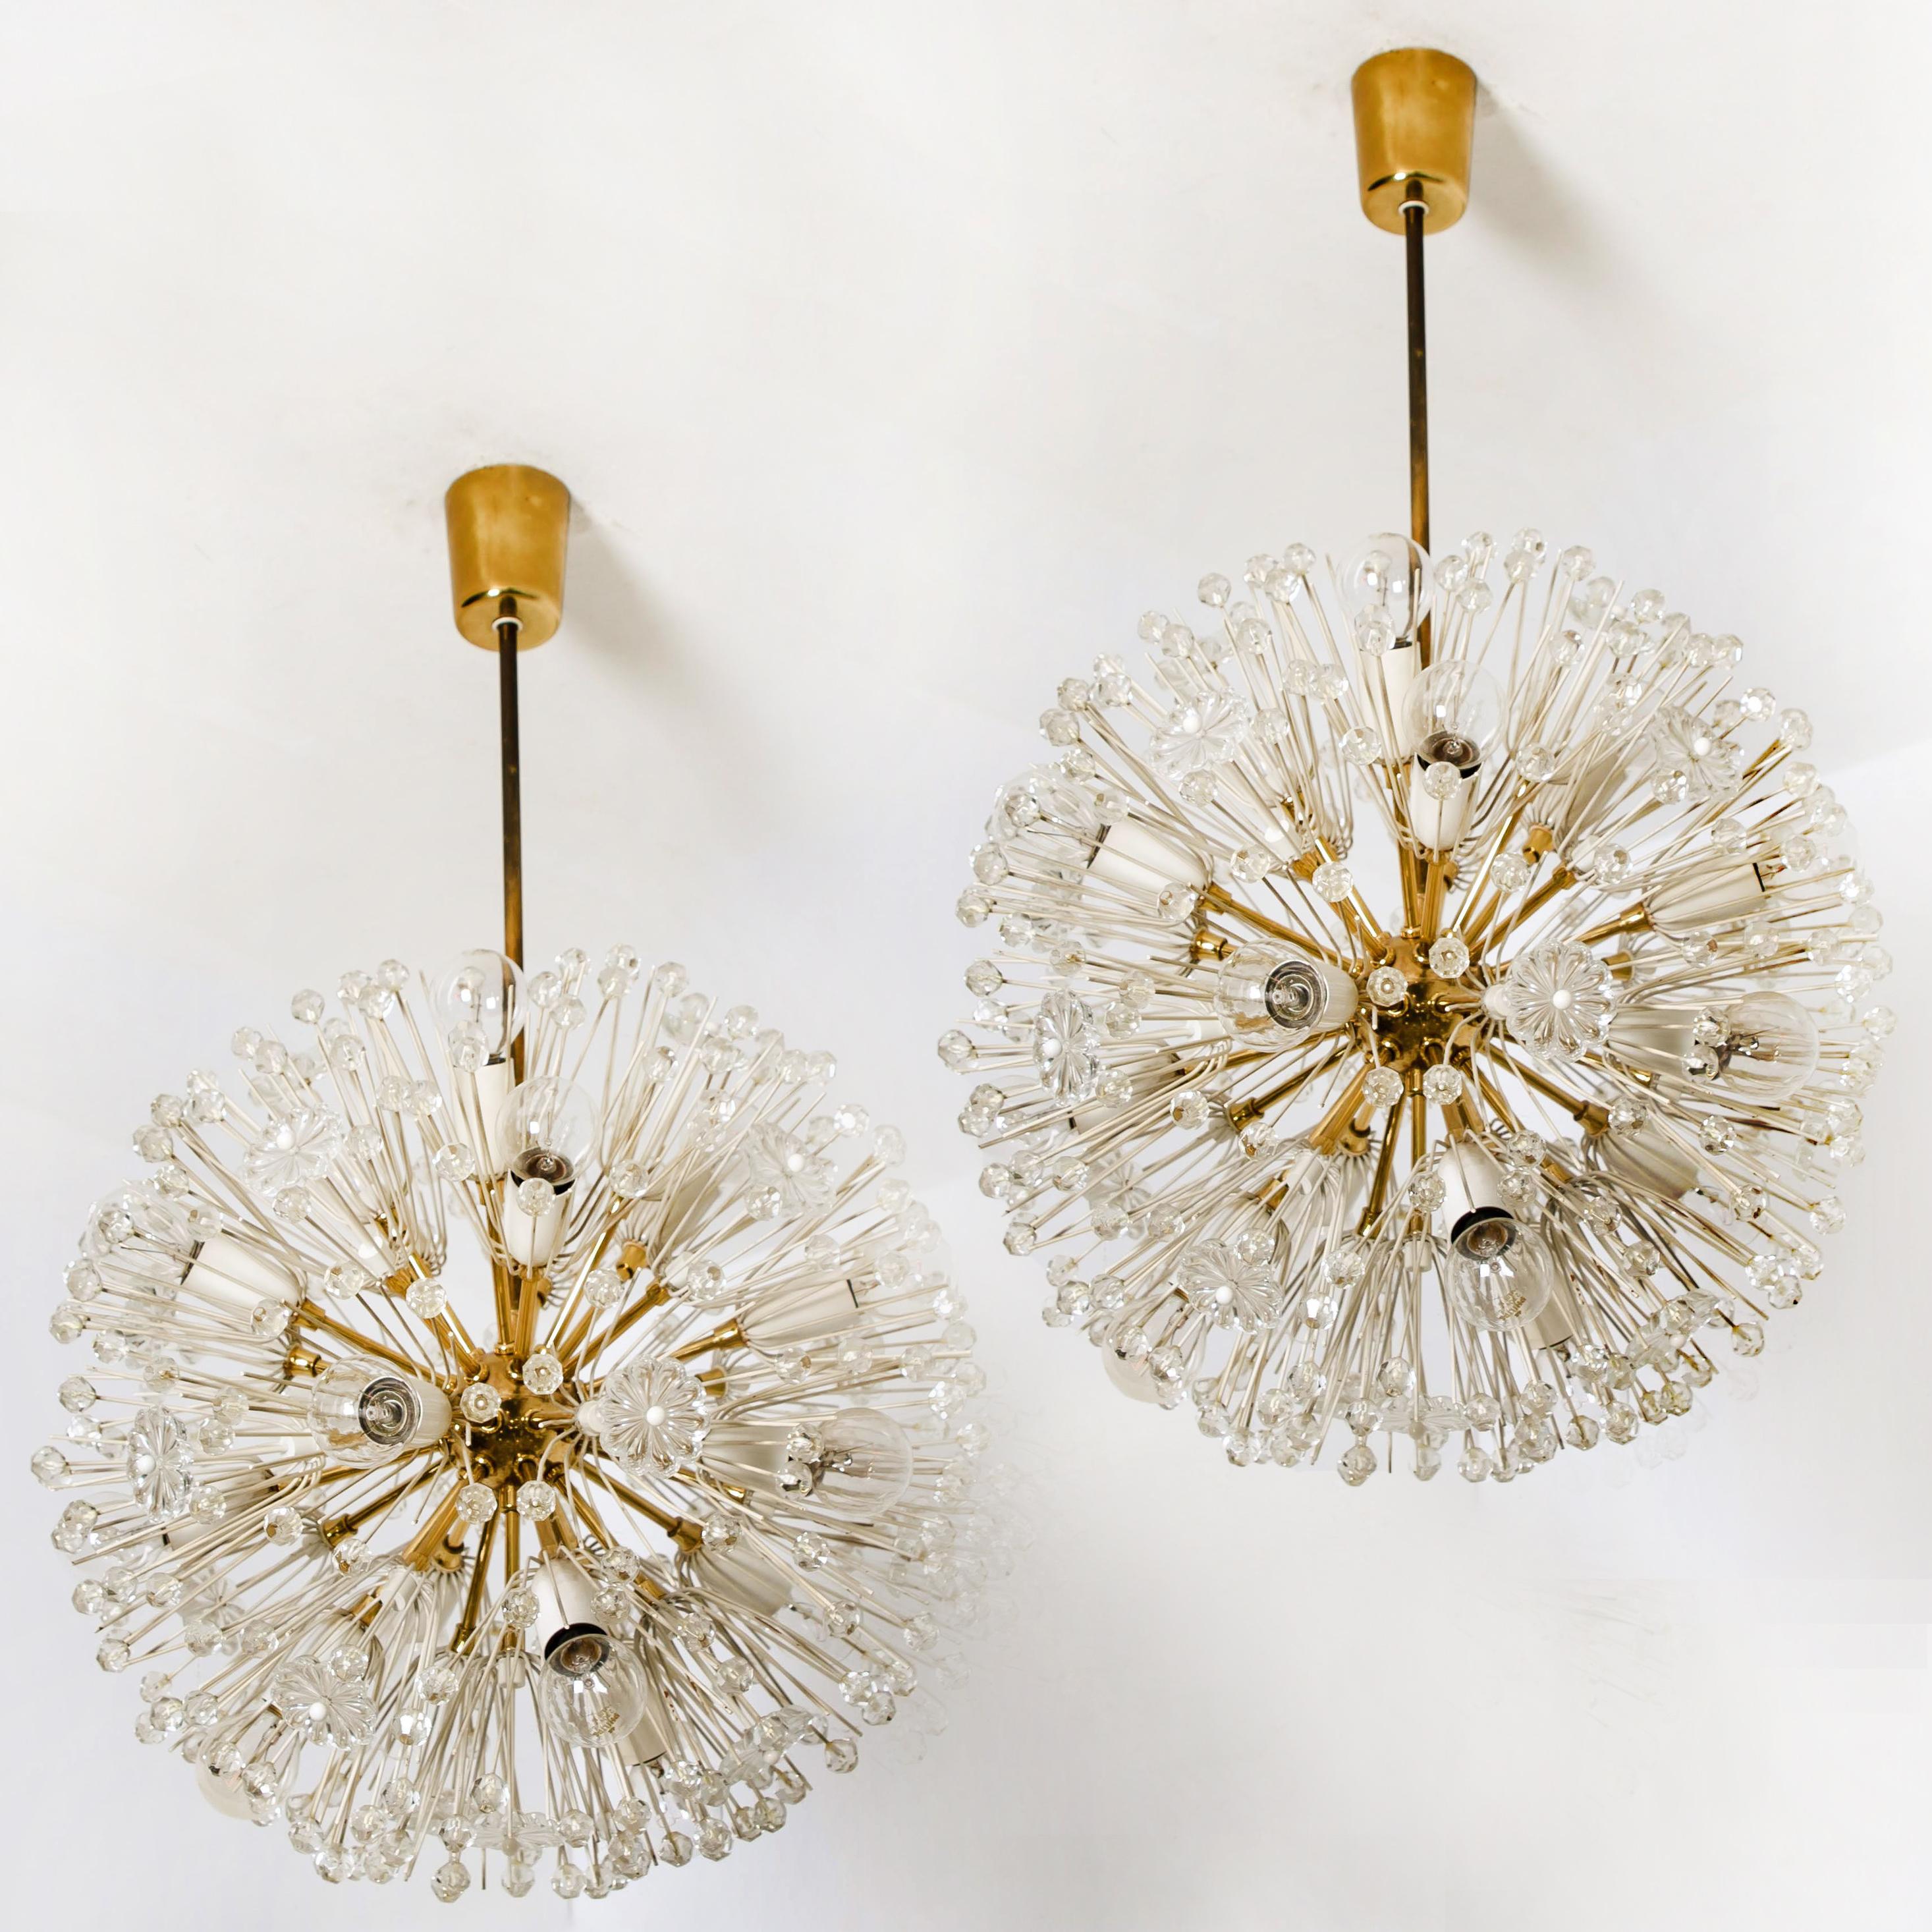 A pair of seventeen-light brass Sputnik fixtures with copious amounts of Austrian crystals by Emil Stejnar for Nikoll. Cosmological. Measures: Ø 17